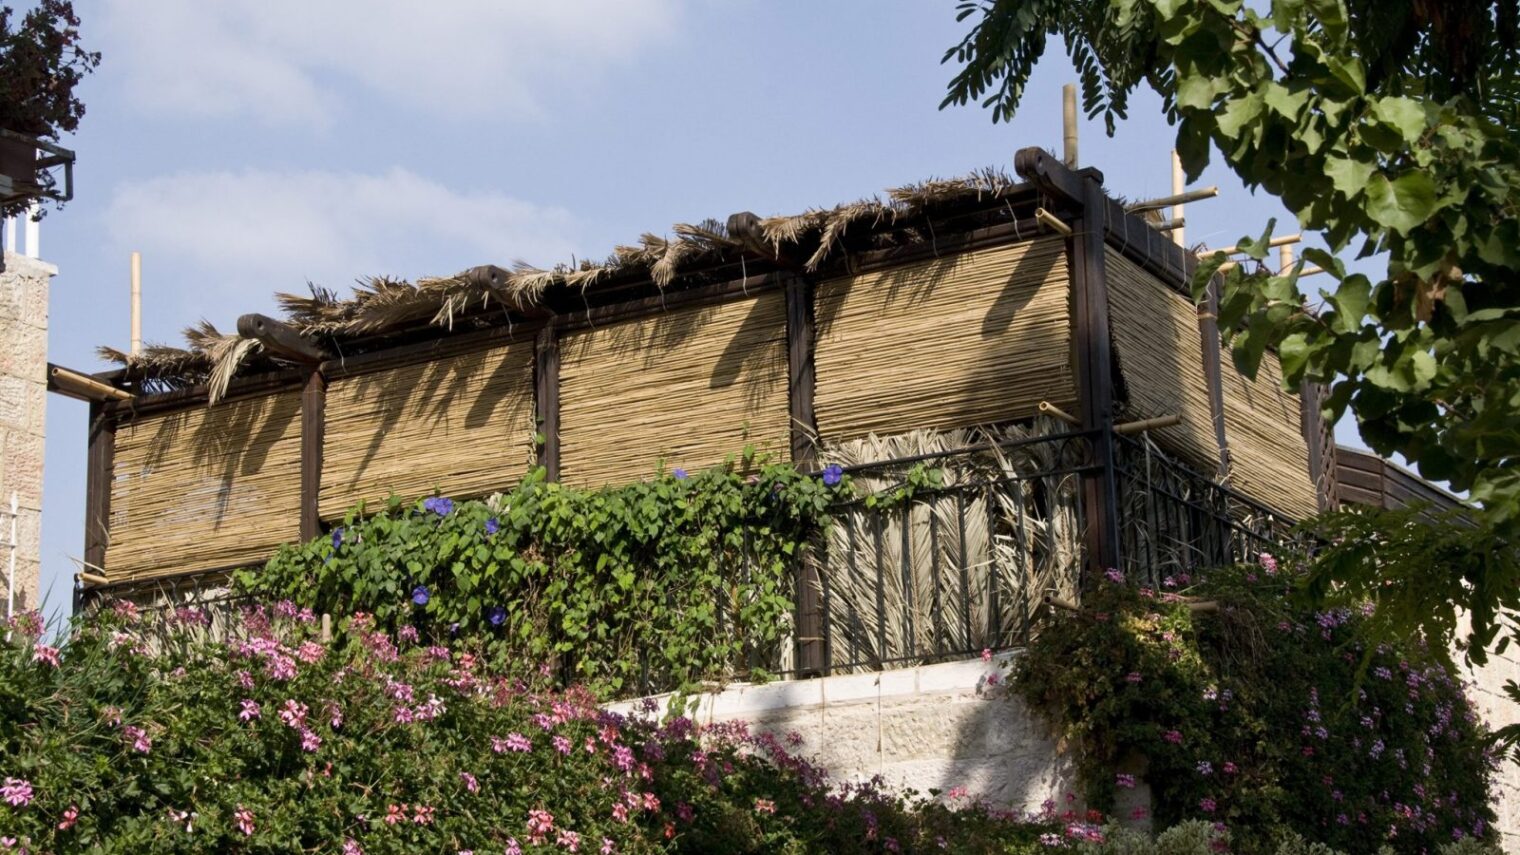 A sukkah on the roof of a home in Jerusalem’s Yemin Moshe neighborhood. Photo by Yehoshua Halevi